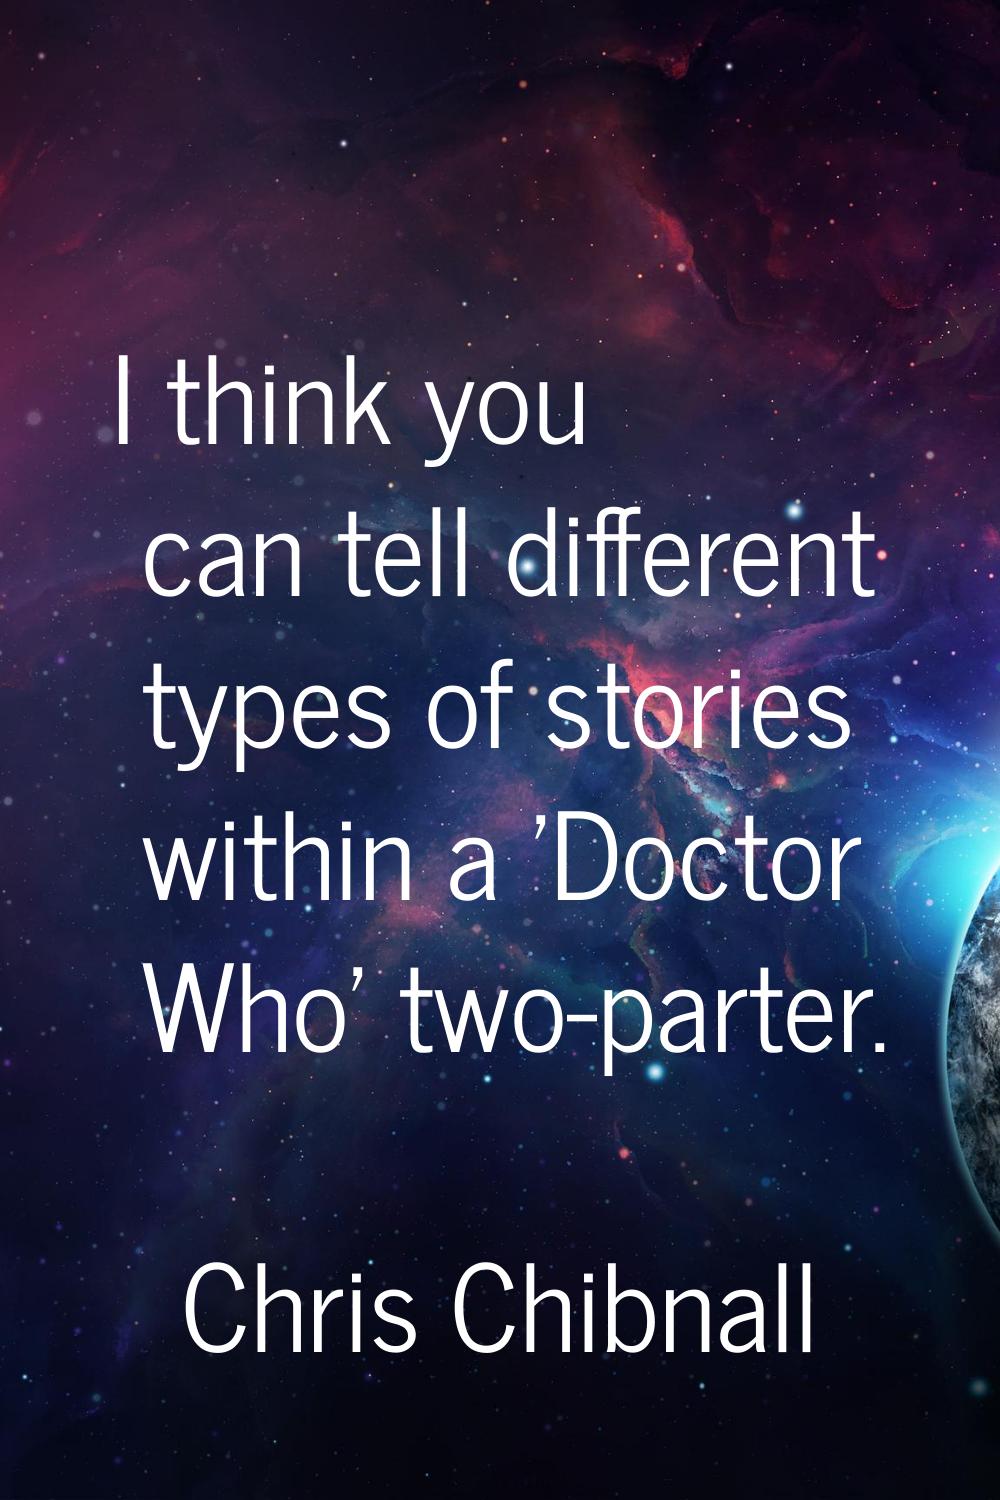 I think you can tell different types of stories within a 'Doctor Who' two-parter.